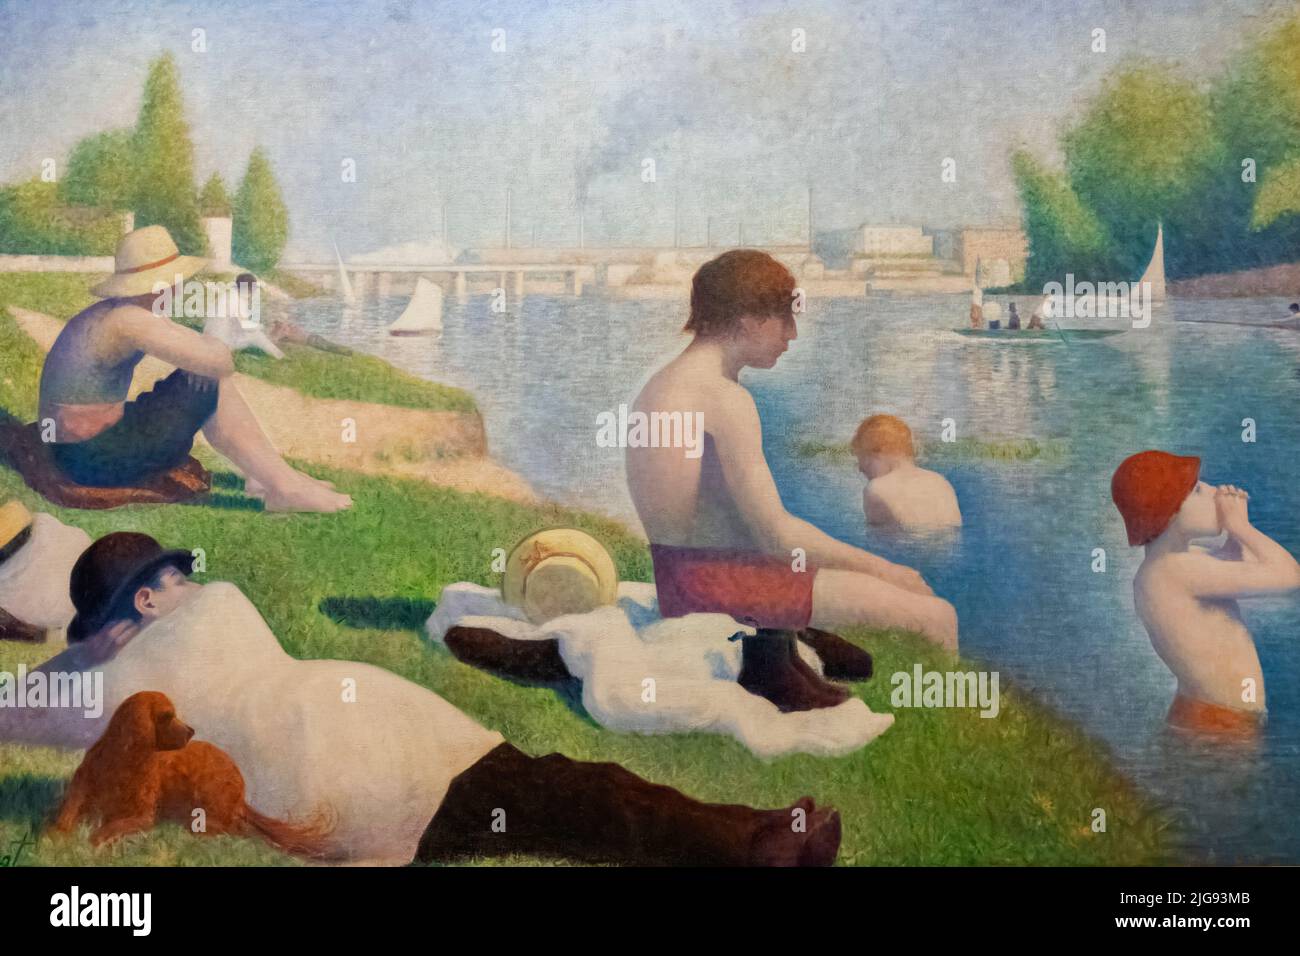 Painting titled 'Bathers at Asnieres' by French Artist Georges Seurat dated 1884 Stock Photo